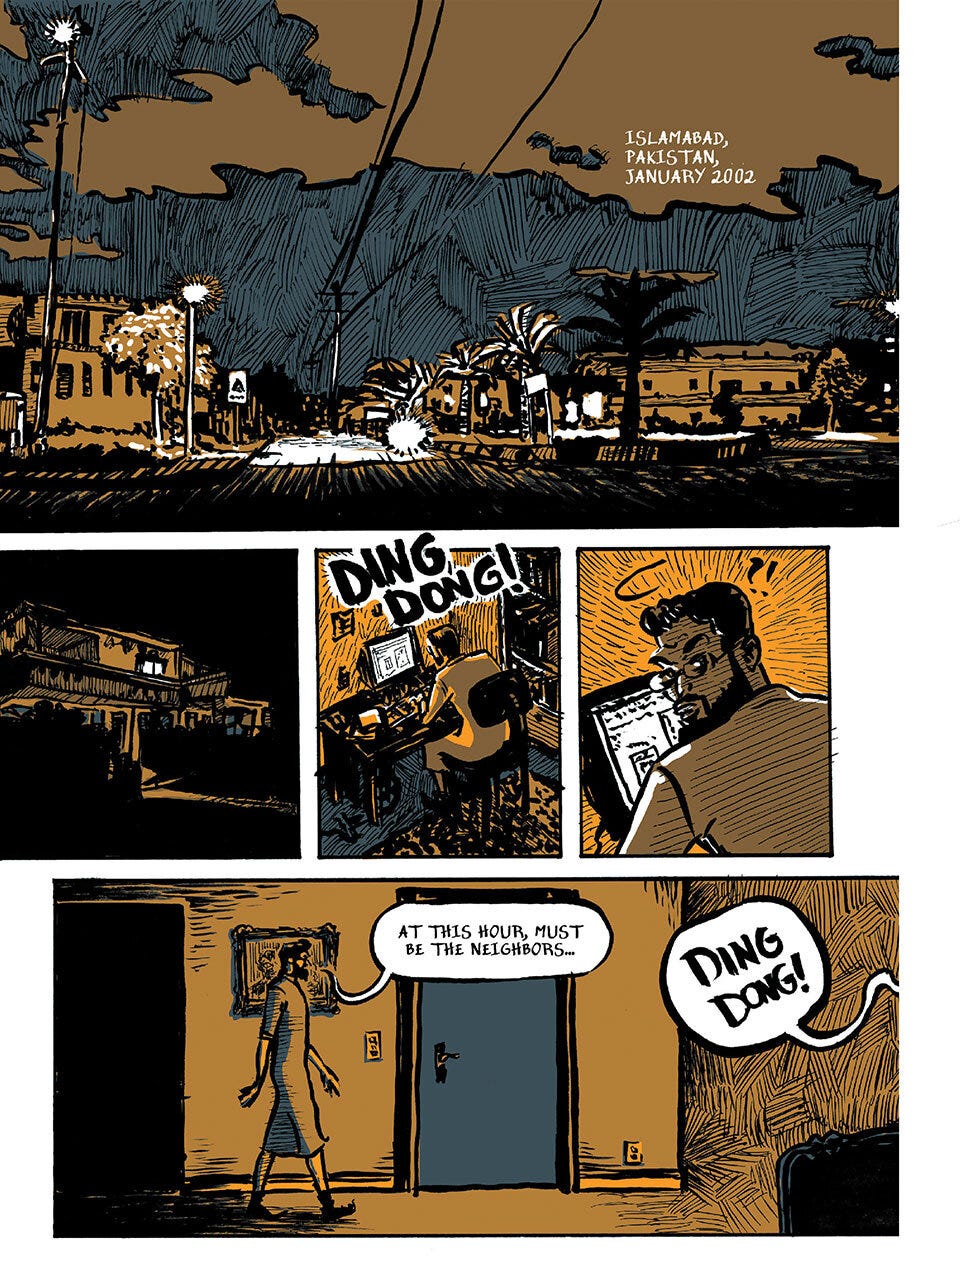 A page from Guantanamo Voices depicting the story of Moazzam Begg, drawn by Omar Khouri.